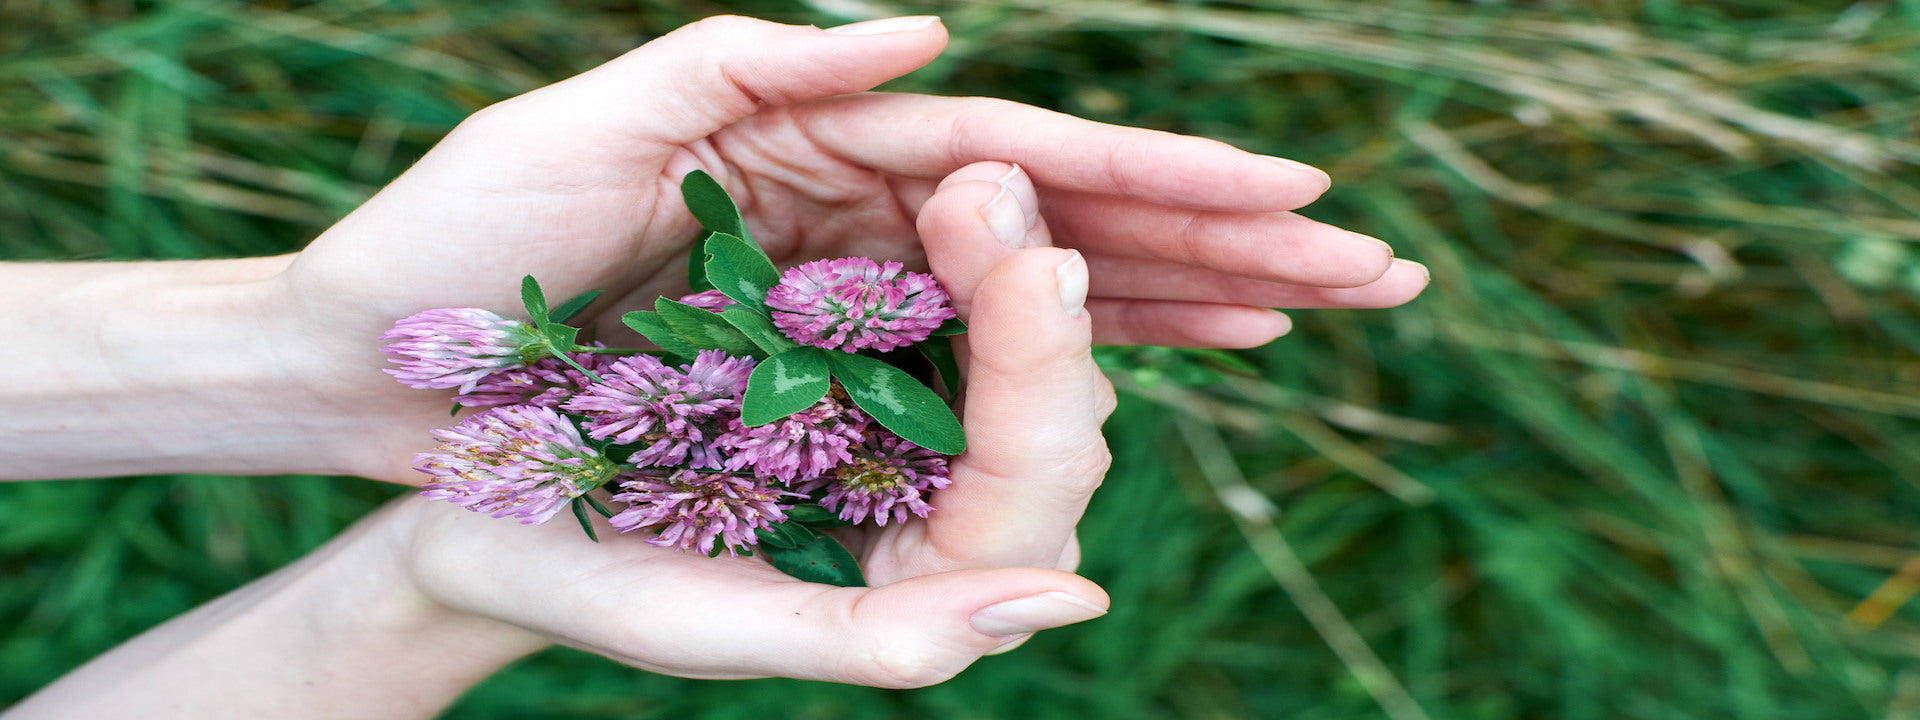 Can You Benefit From Fertility Herbs?